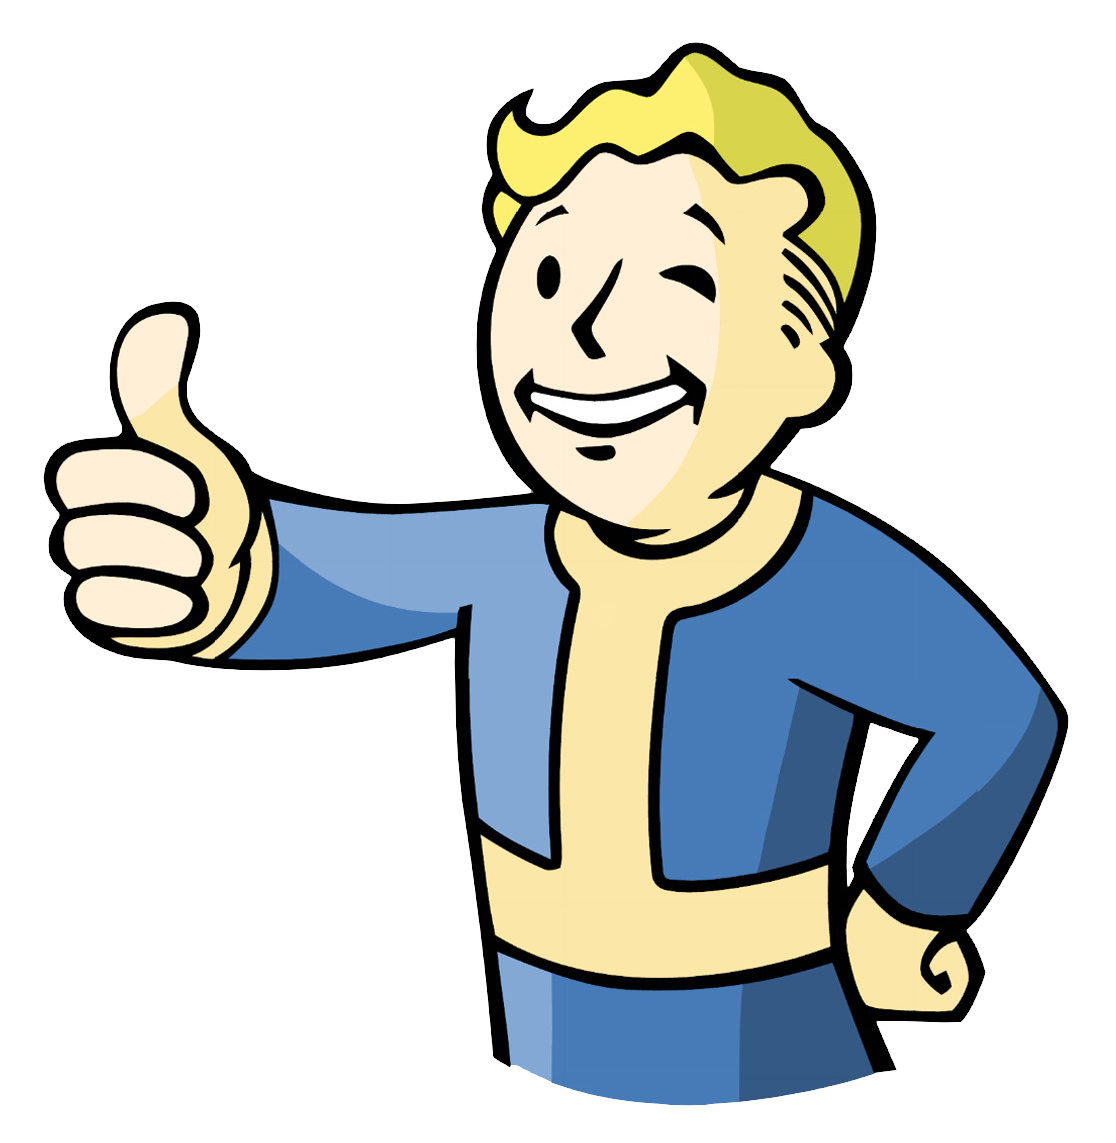 Vault Boy - The Fallout wiki - Fallout: New Vegas and more